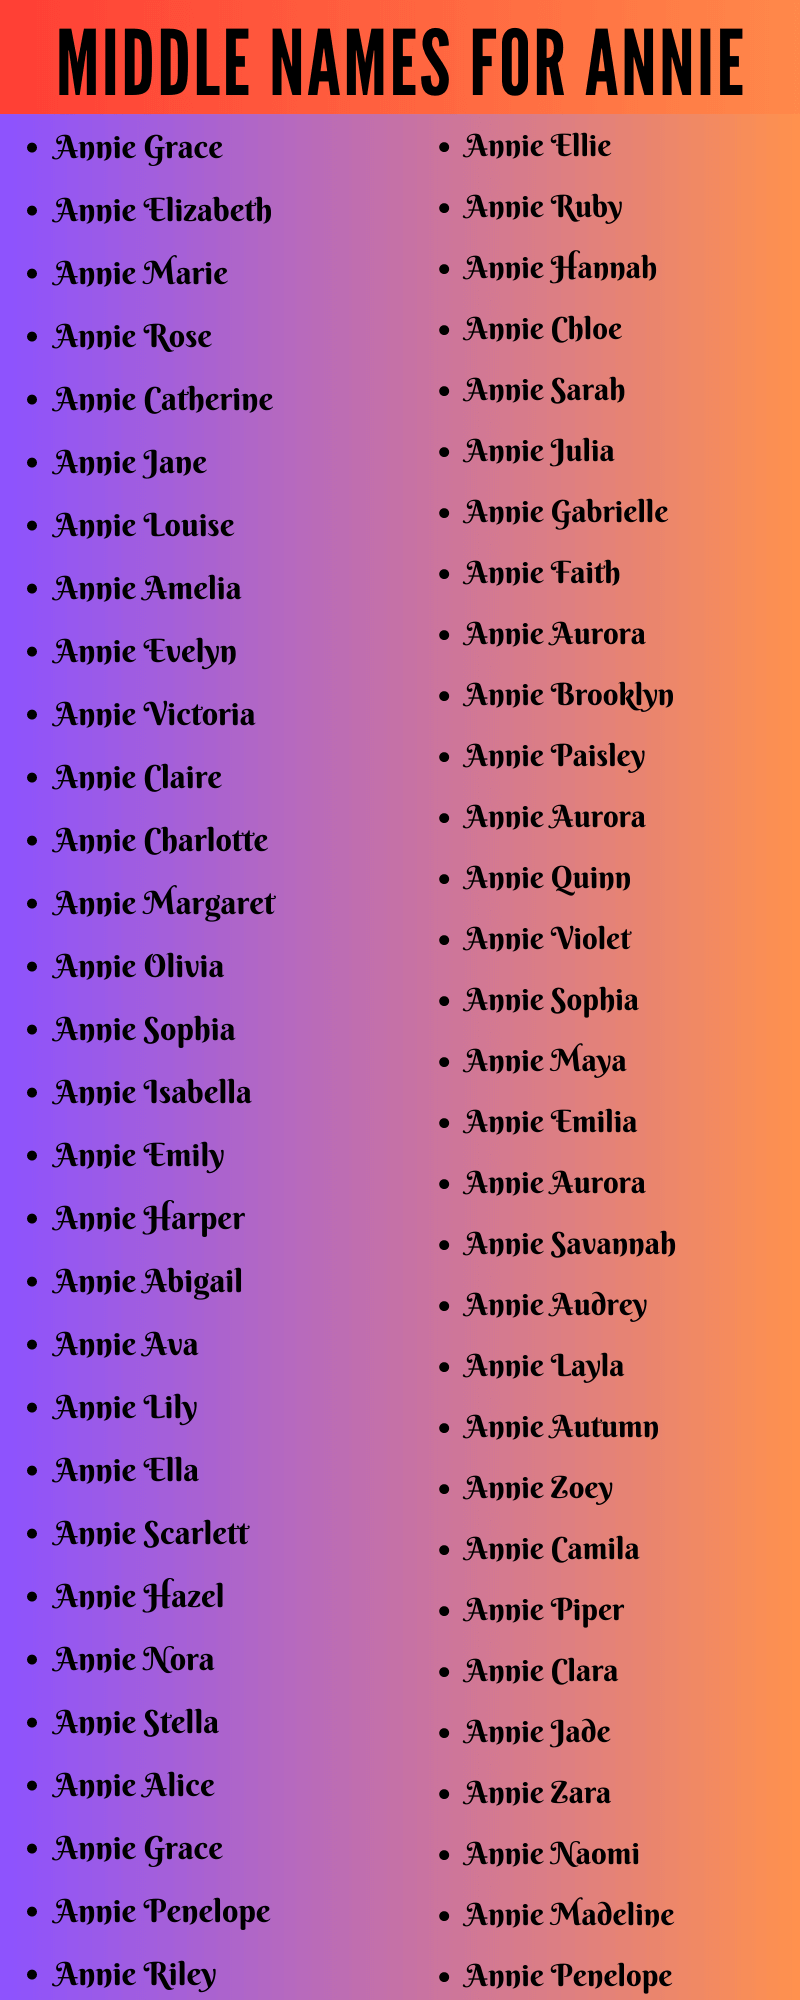 400 Cute Middle Names For Annie